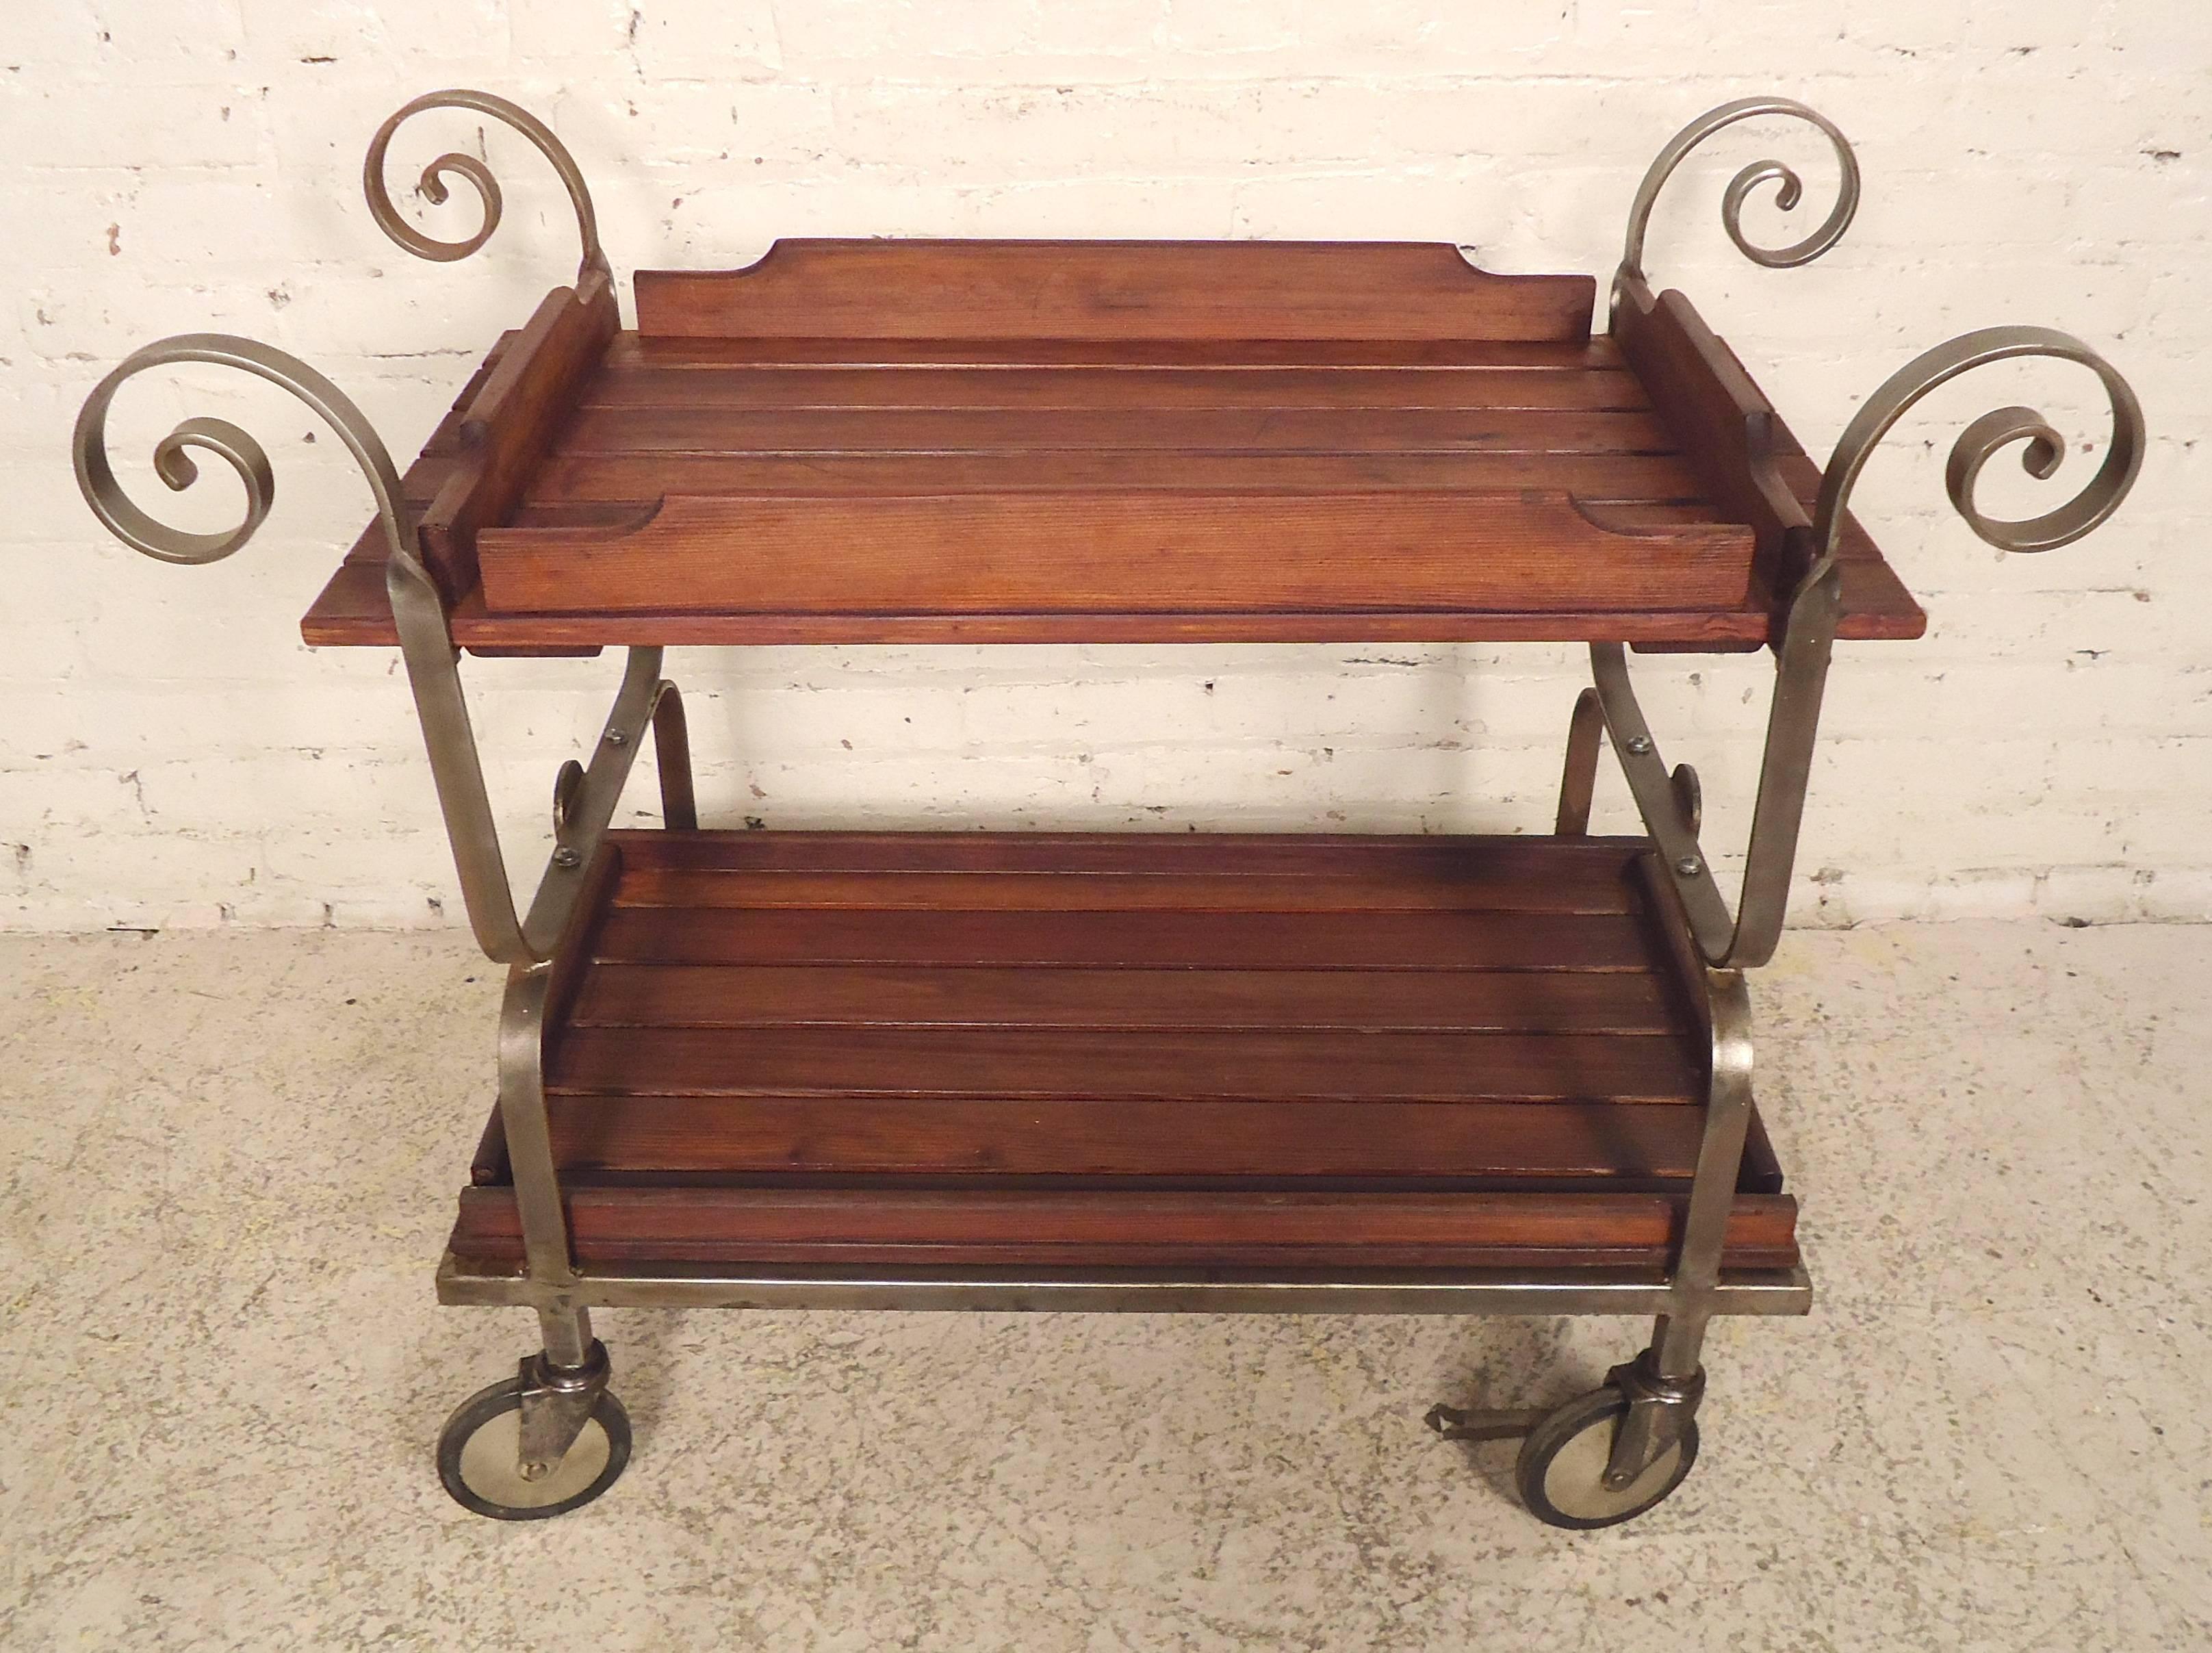 Vintage tea cart with removable wood trays set in metal frame with large casters. Metal has been restored in a bare metal style finish, and features lovely embellishments.

(Please confirm item location - NY or NJ - with dealer).
      